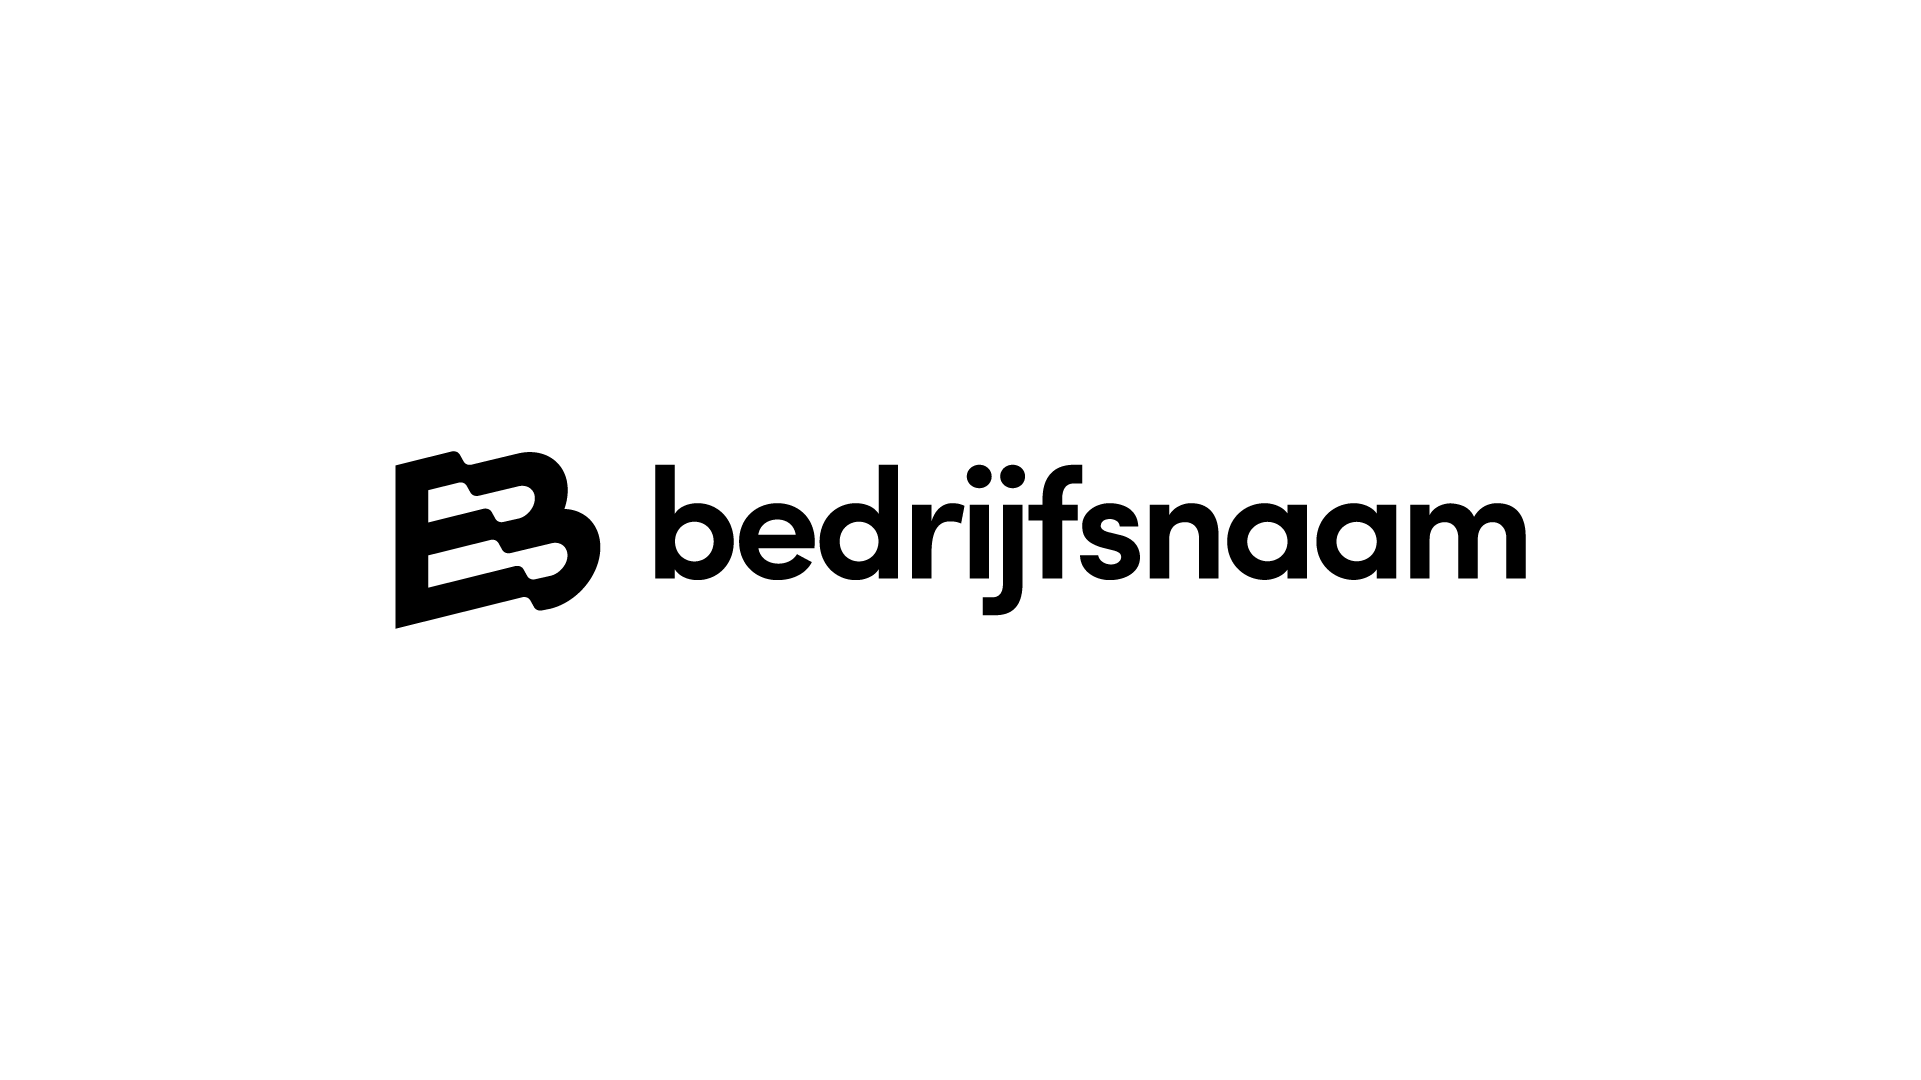 Premium Domain Marketplace logo, letter 'B' with flag, symbolizing premium and global domain offerings